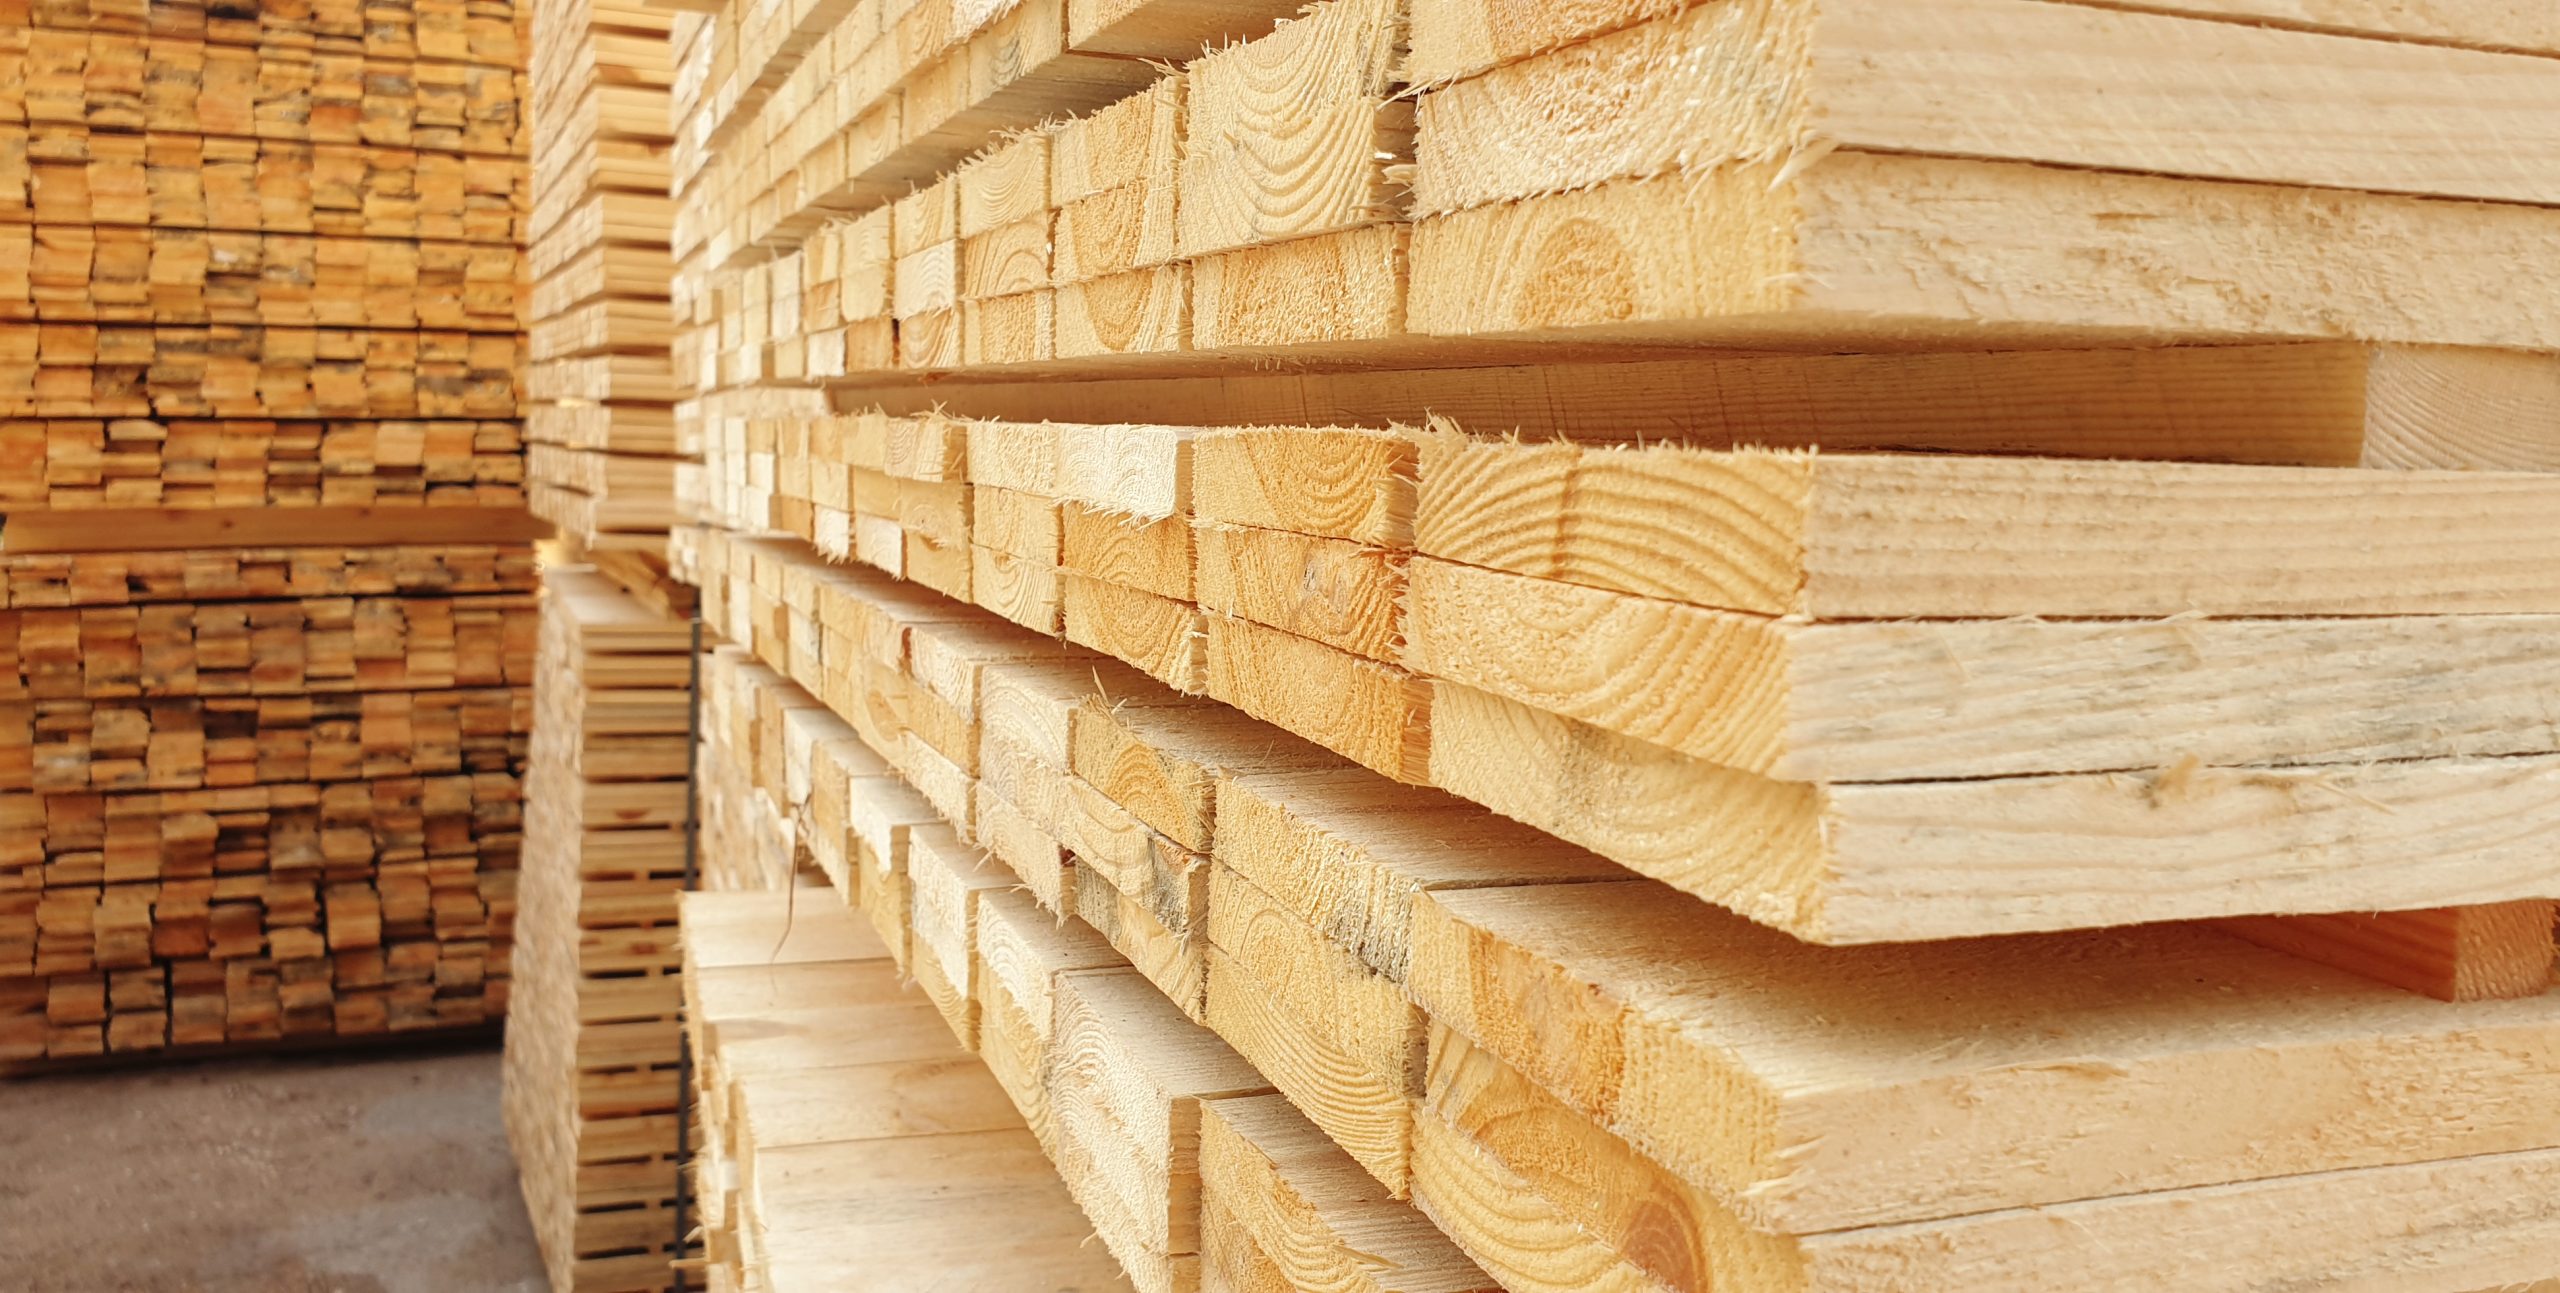 Raw,Wood,Drying,In,The,Lumber,Warehouse